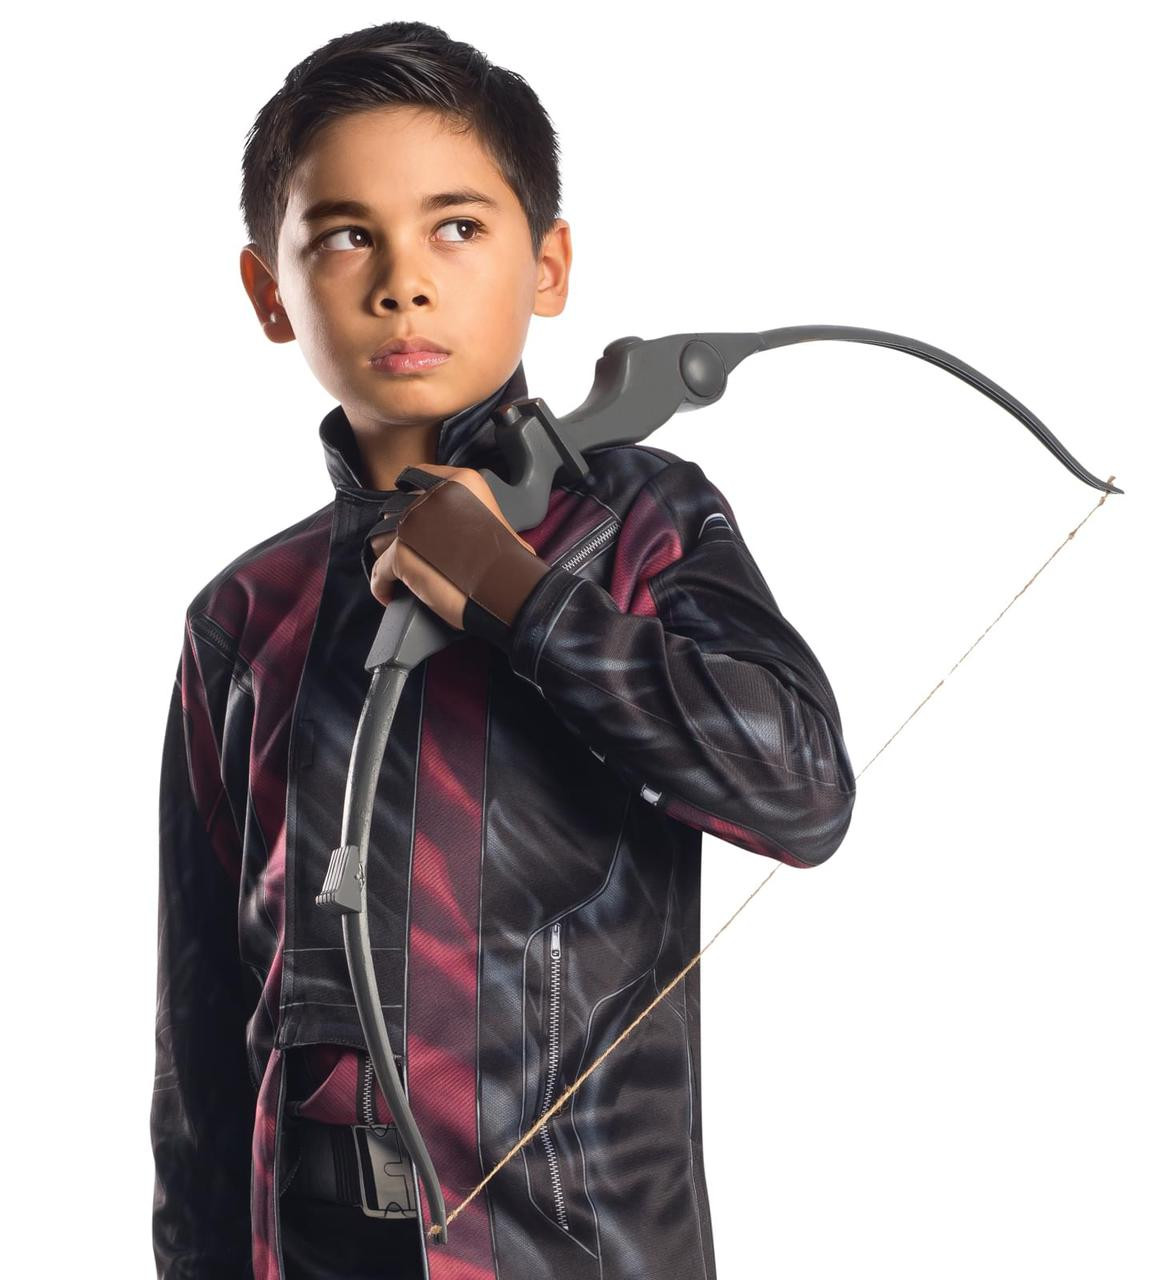 Hawkeye Bow and Arrow Set -Avengers 2 - ThePartyWorks